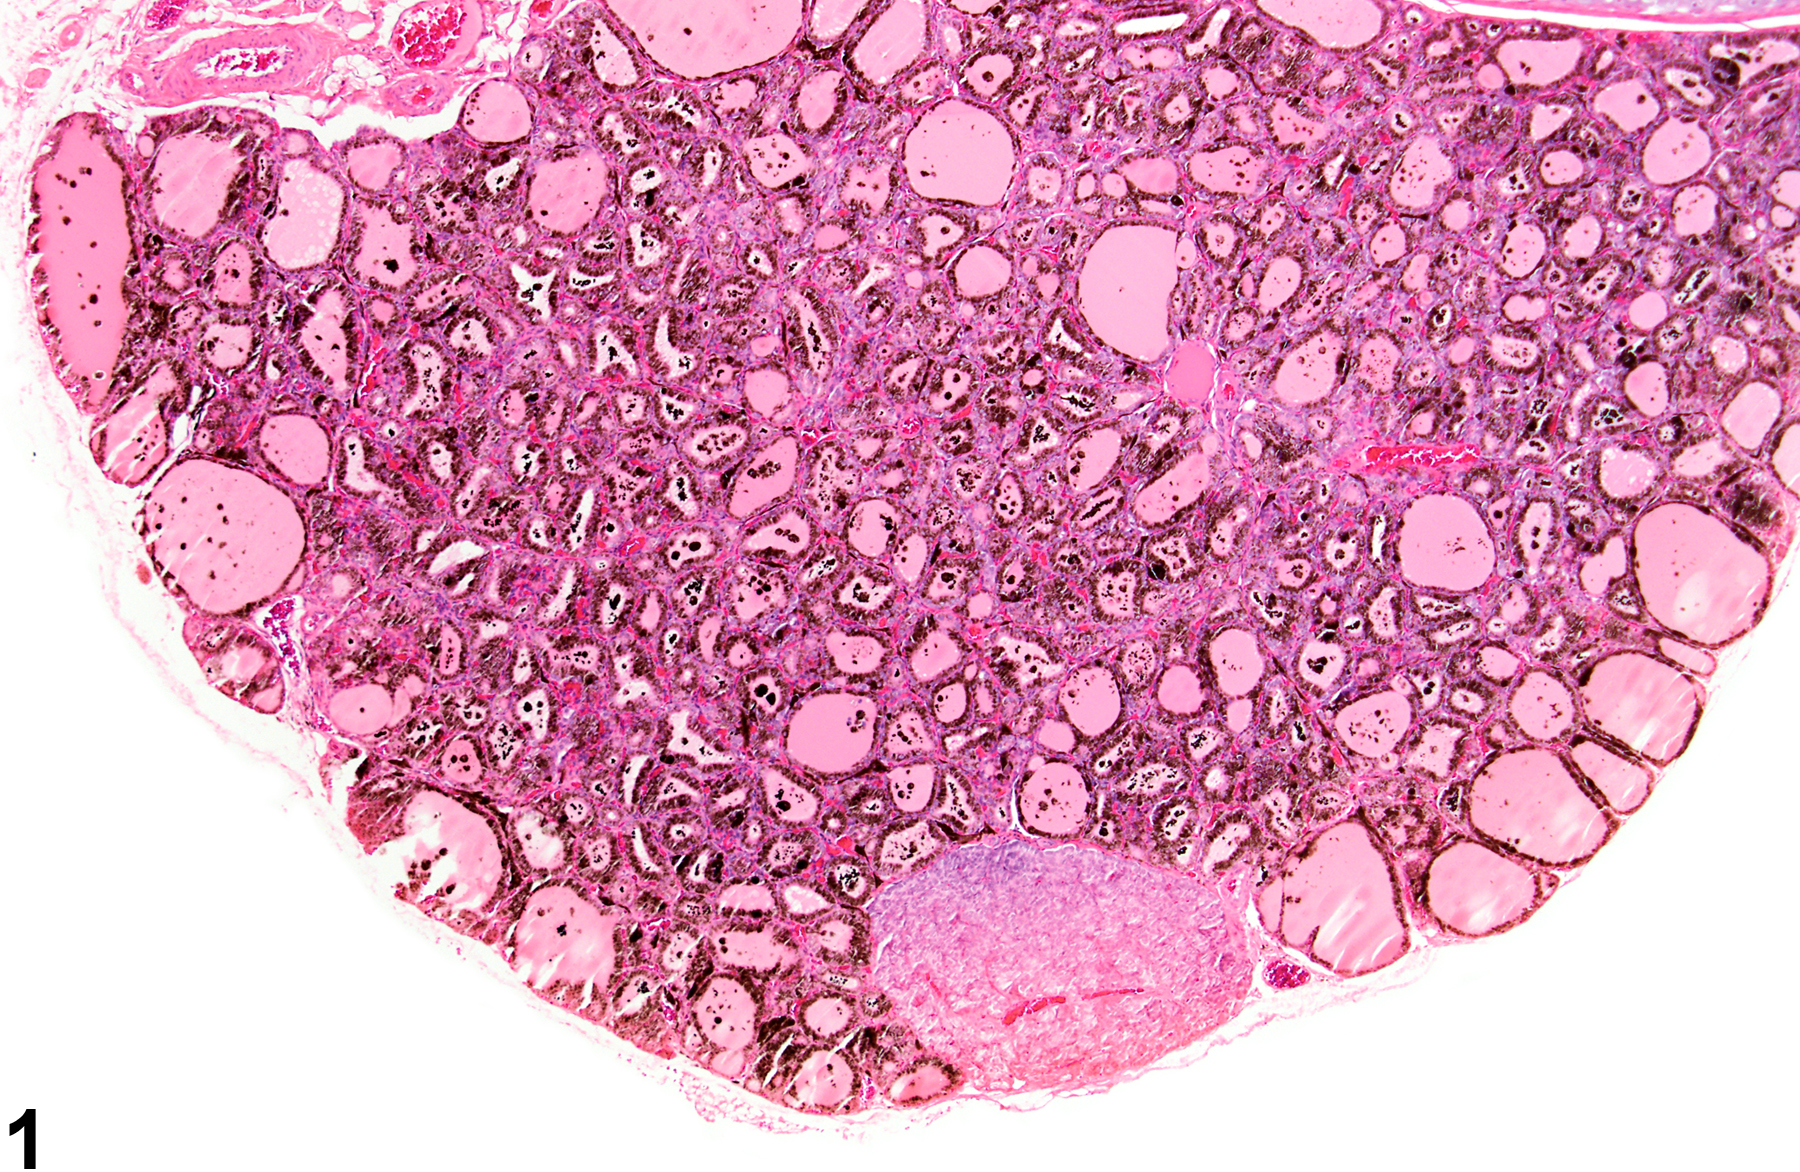 Image of follicle pigment in the thyroid gland from a male F344/N rat in a subchronic study